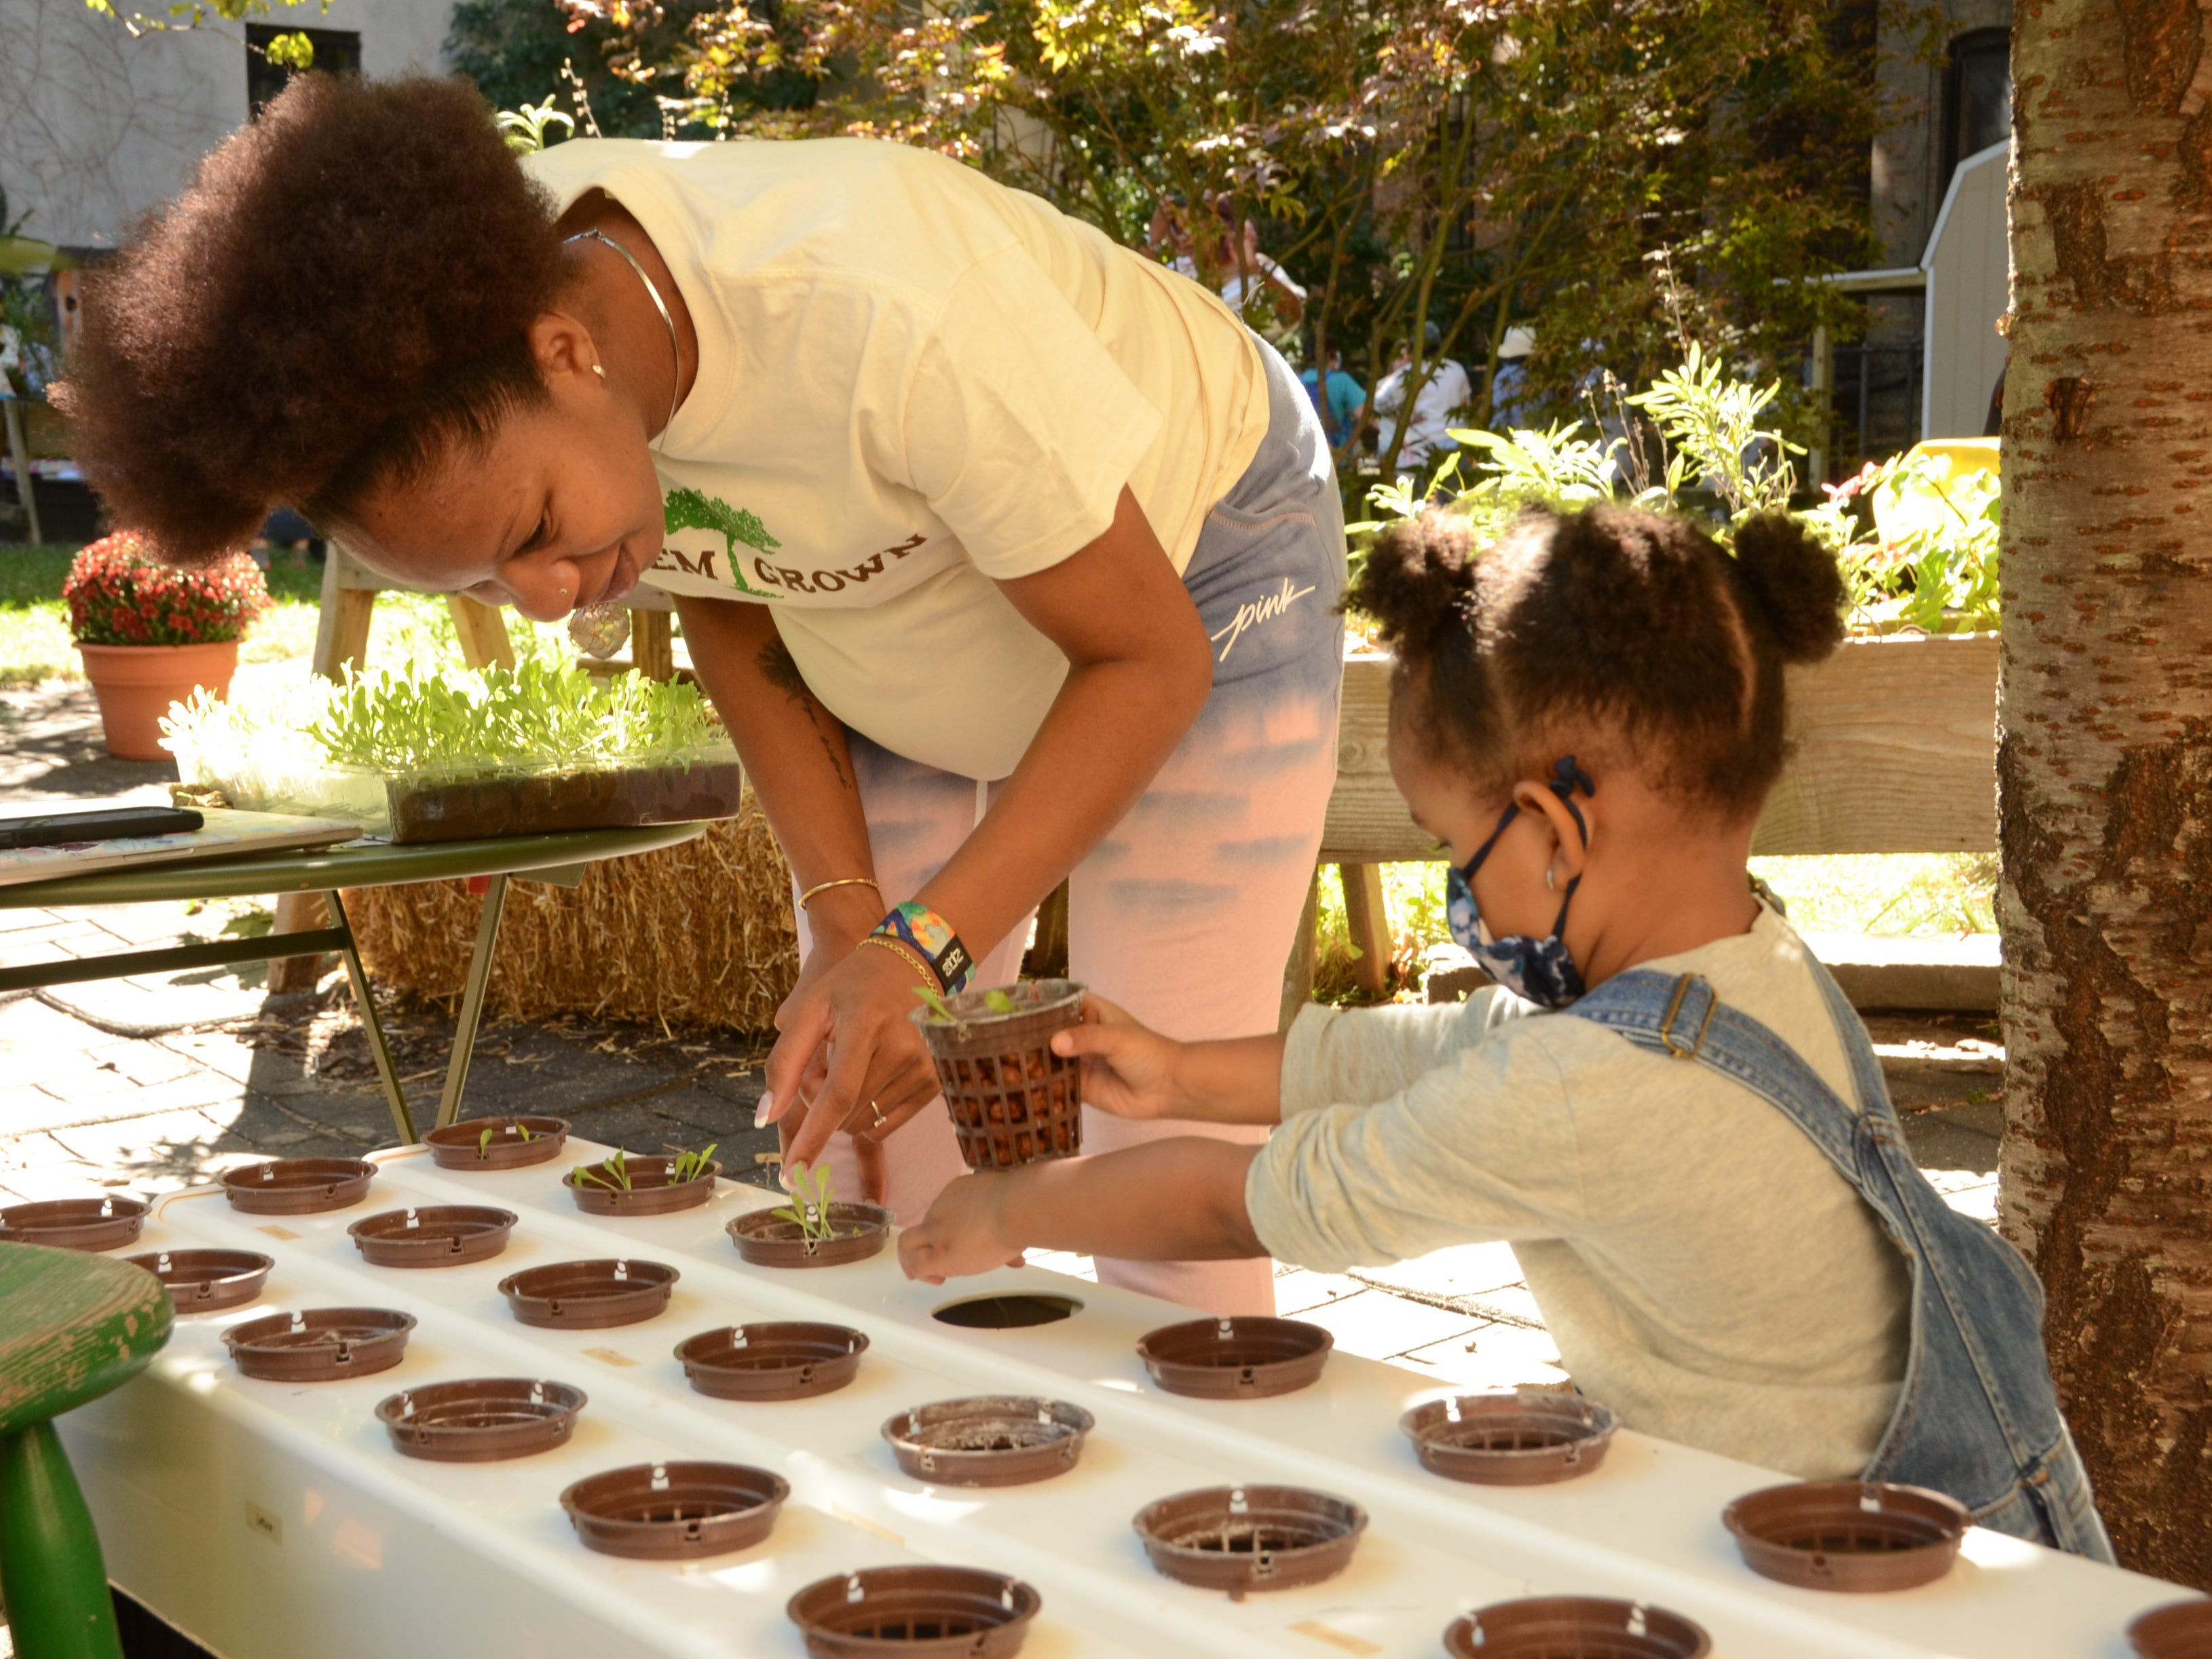 A Harlem Grown staff member works with a student at the community garden